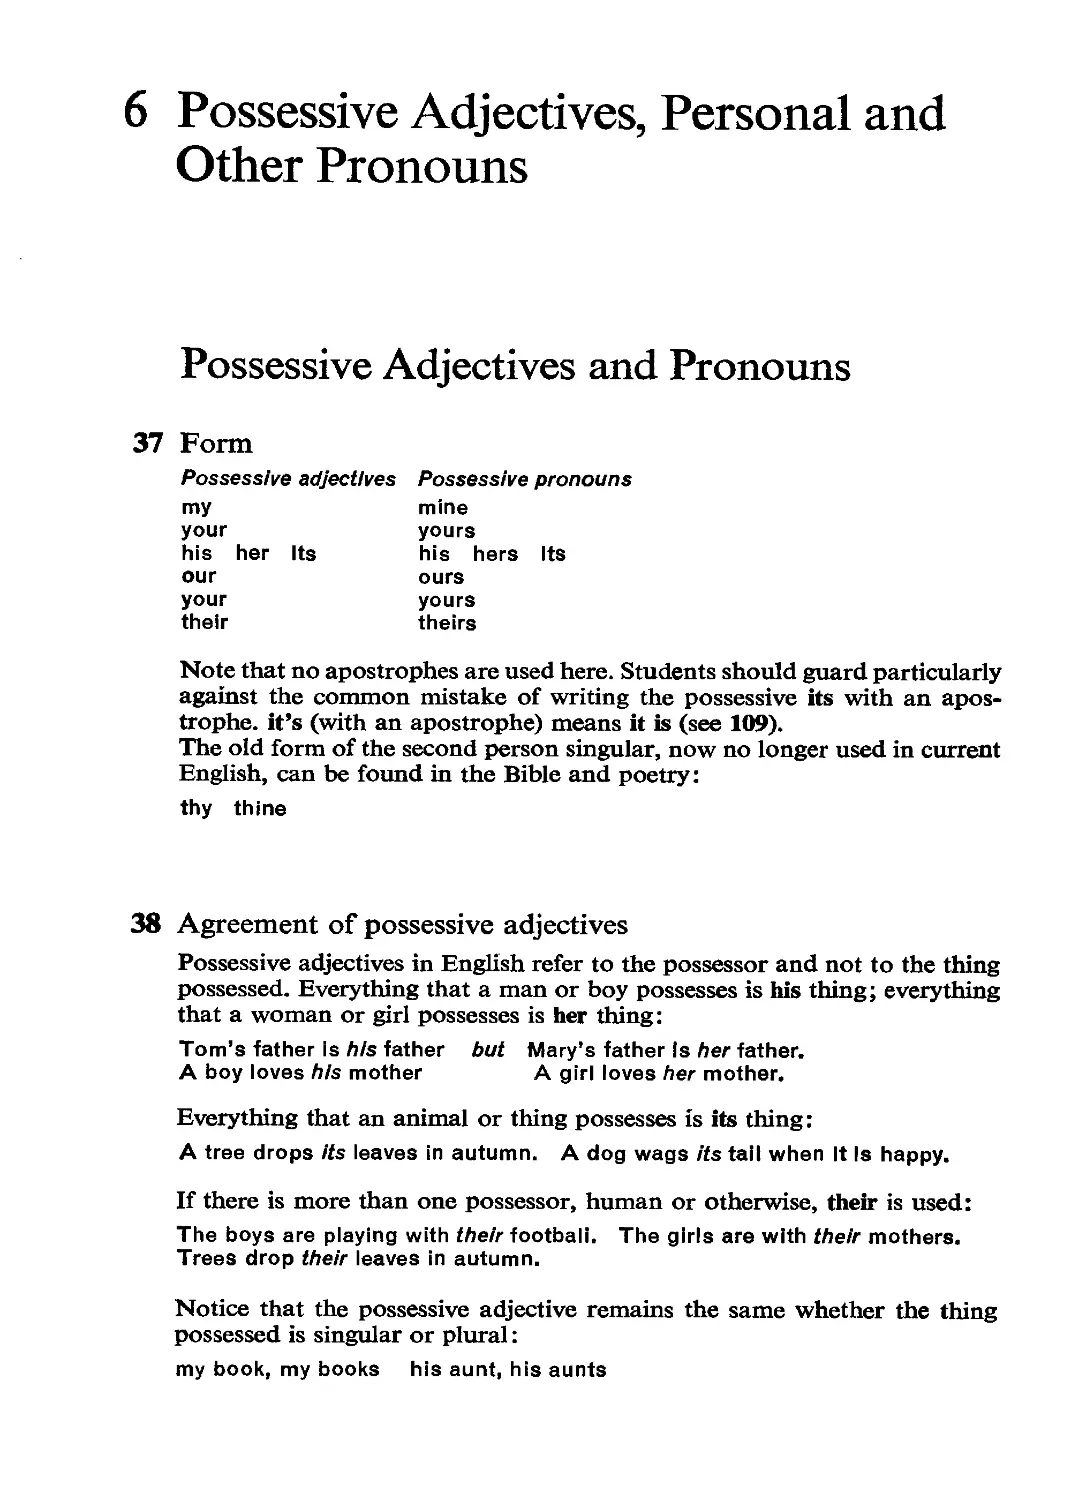 Possessive Adjectives, personal and Other Pronouns